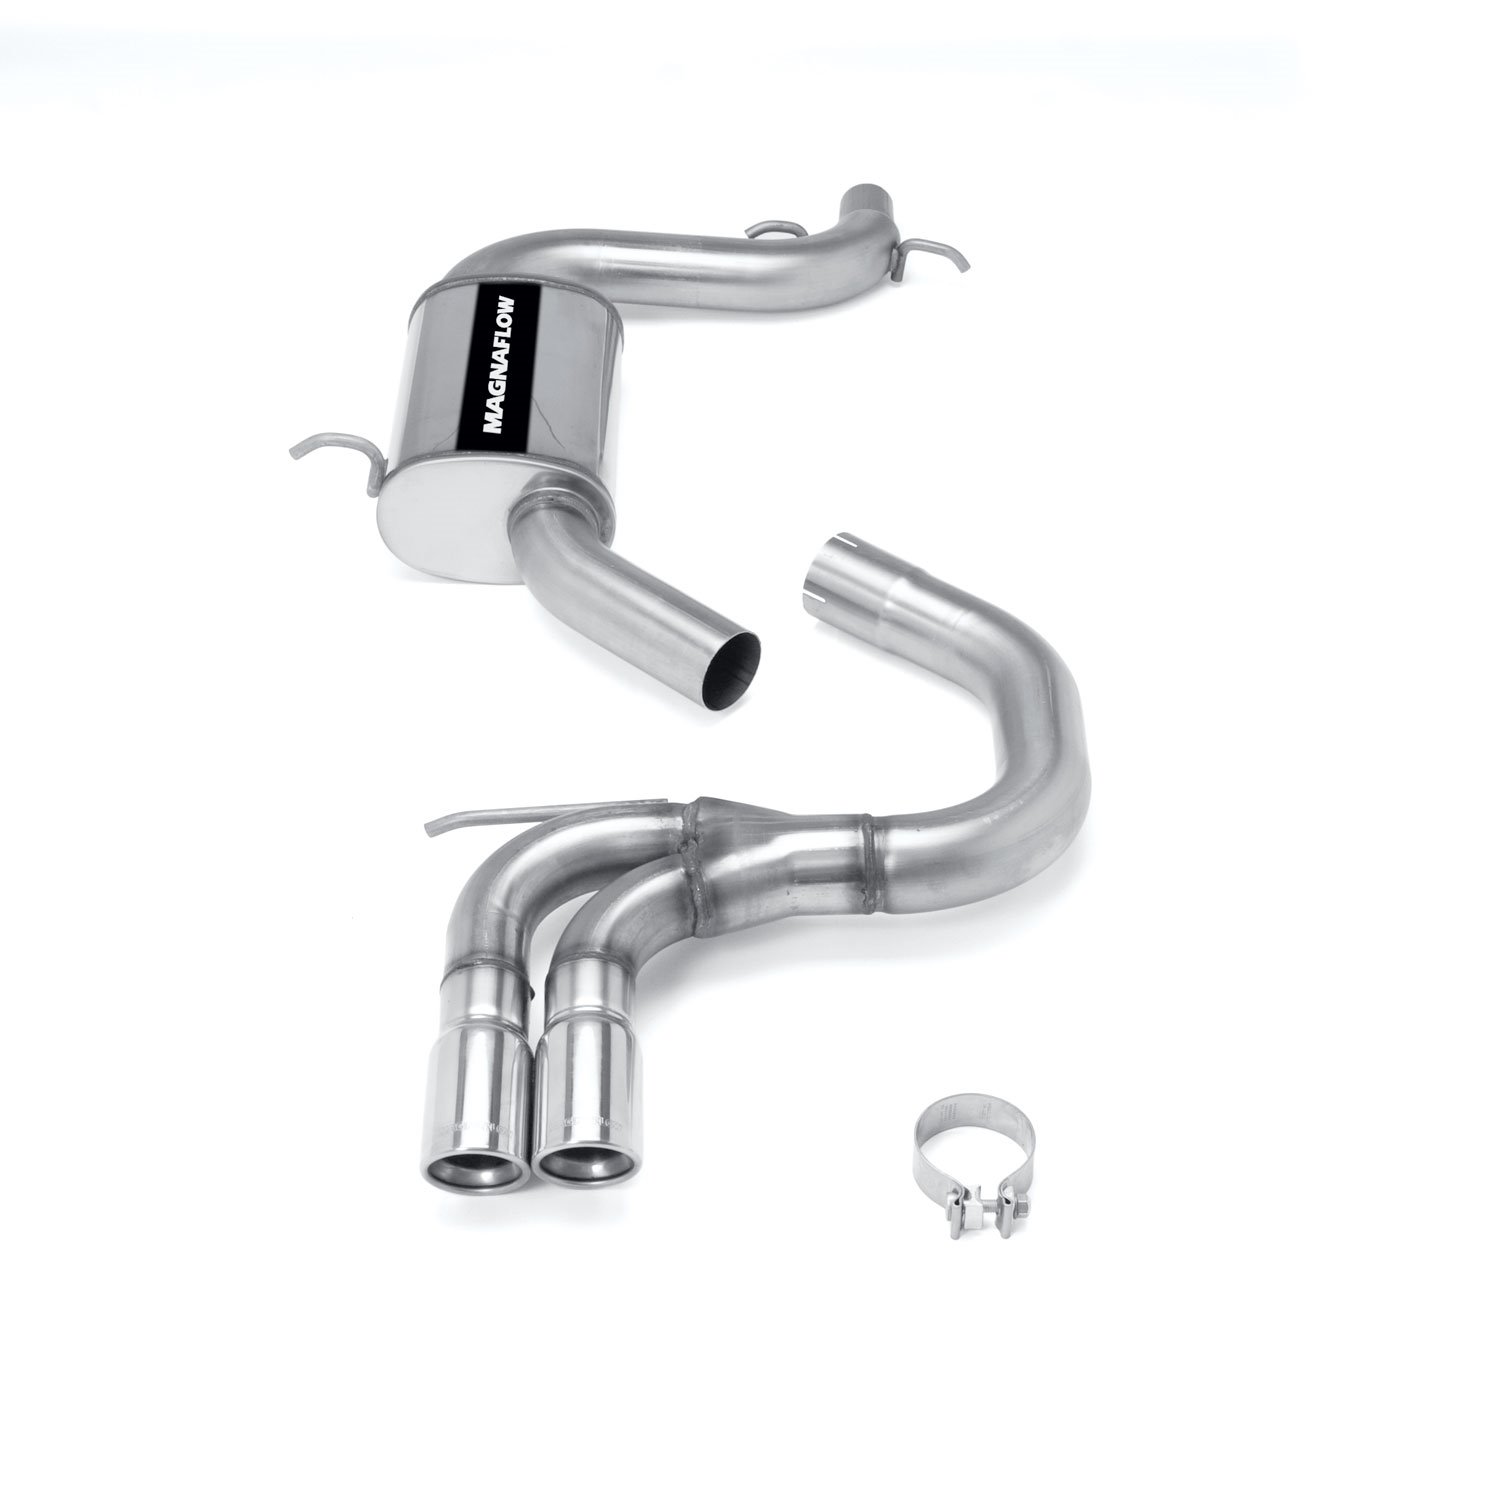 Touring Series Cat-Back Exhaust System 2006-09 VW GTI